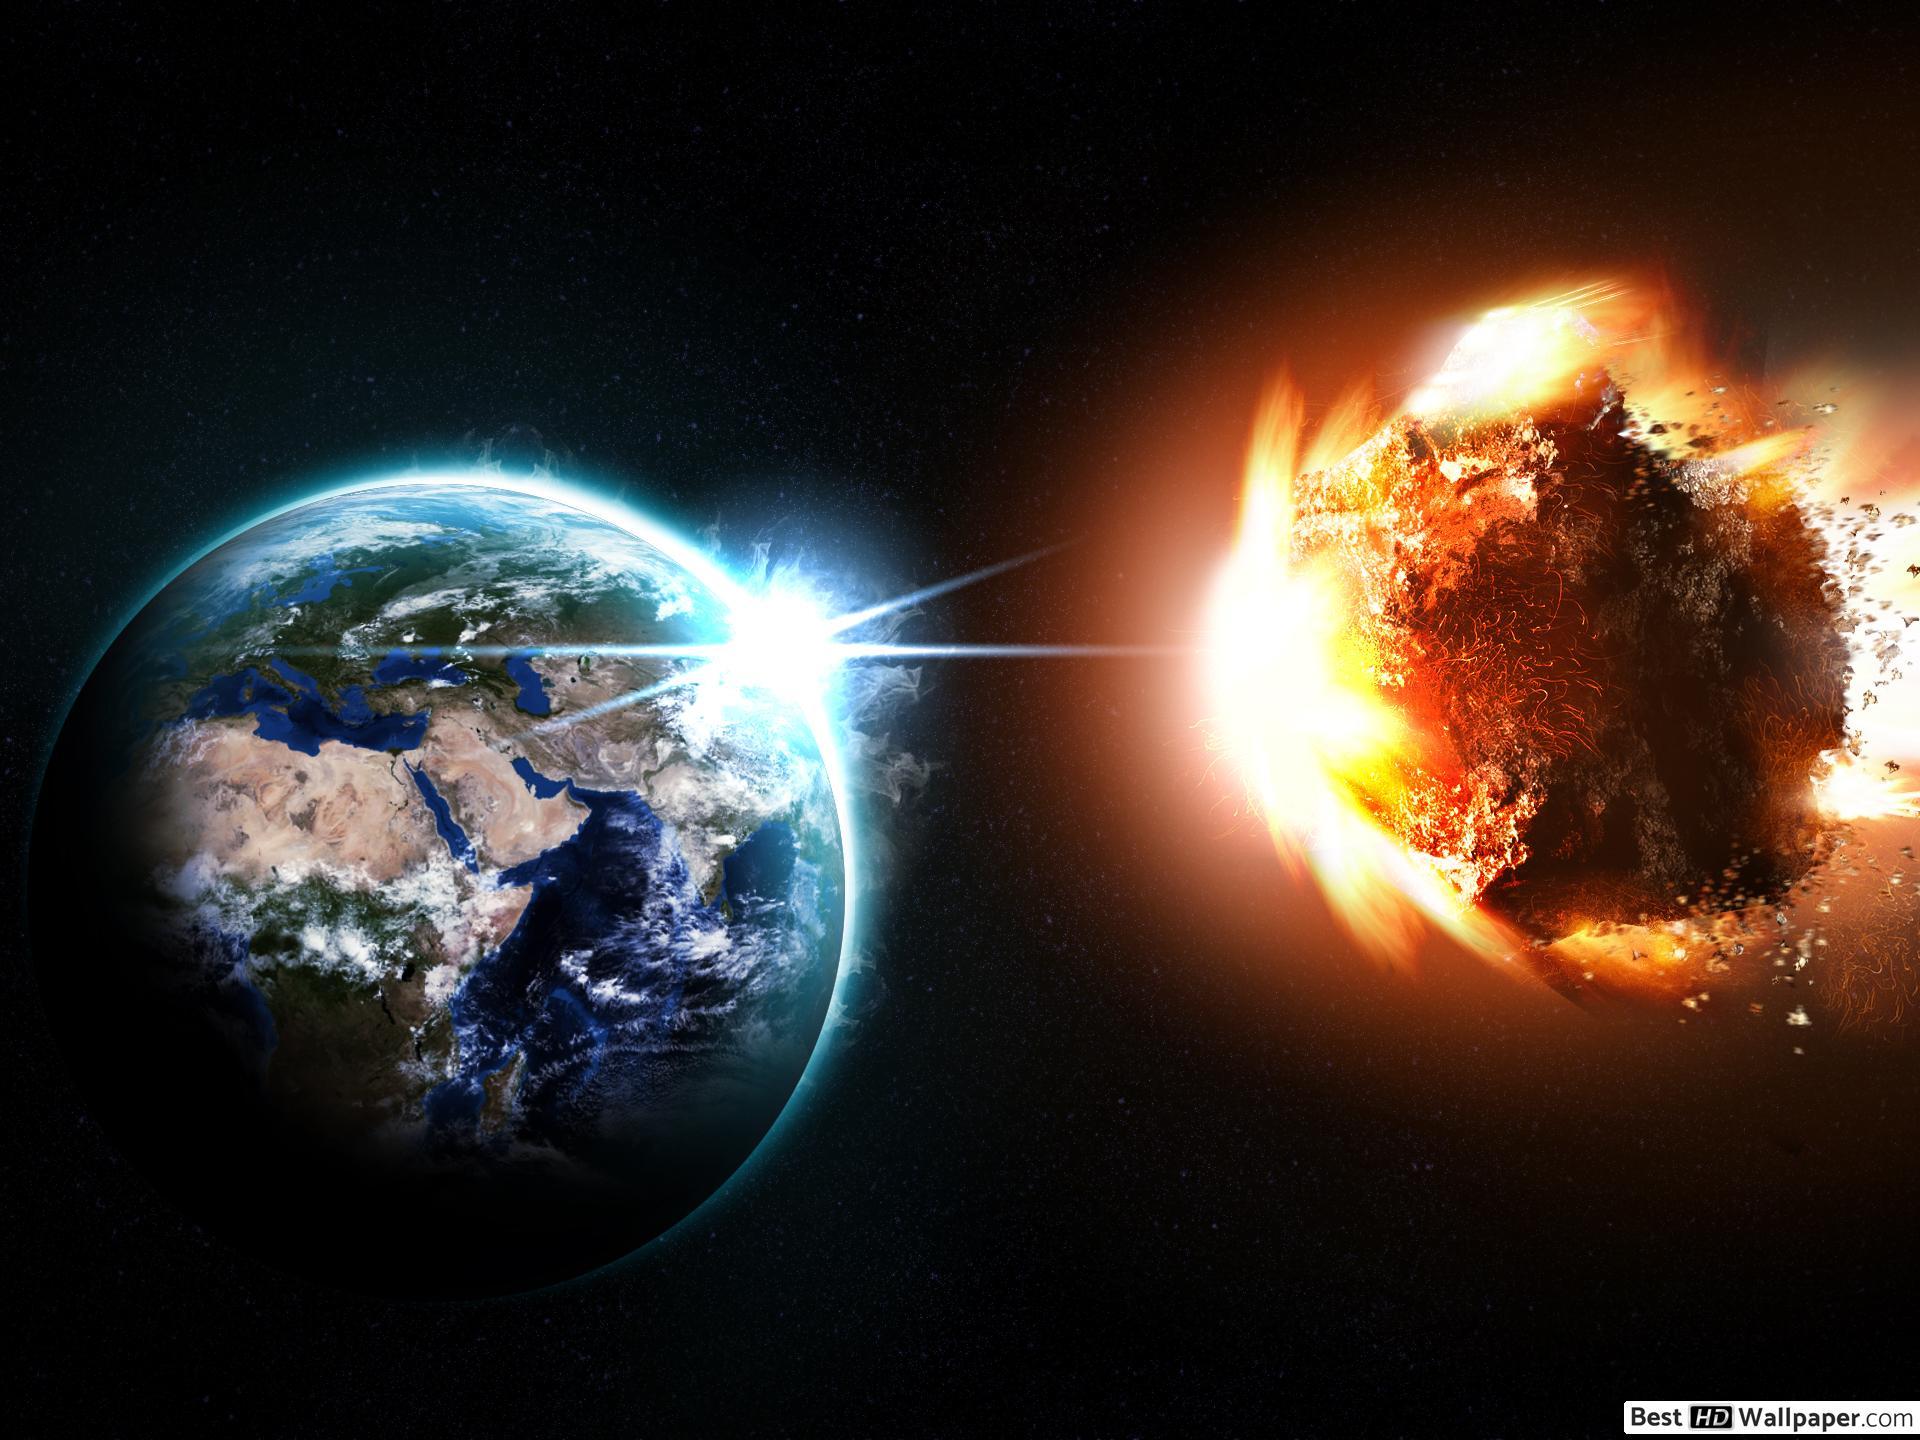 Asteroid hitting Earth HD wallpaper download